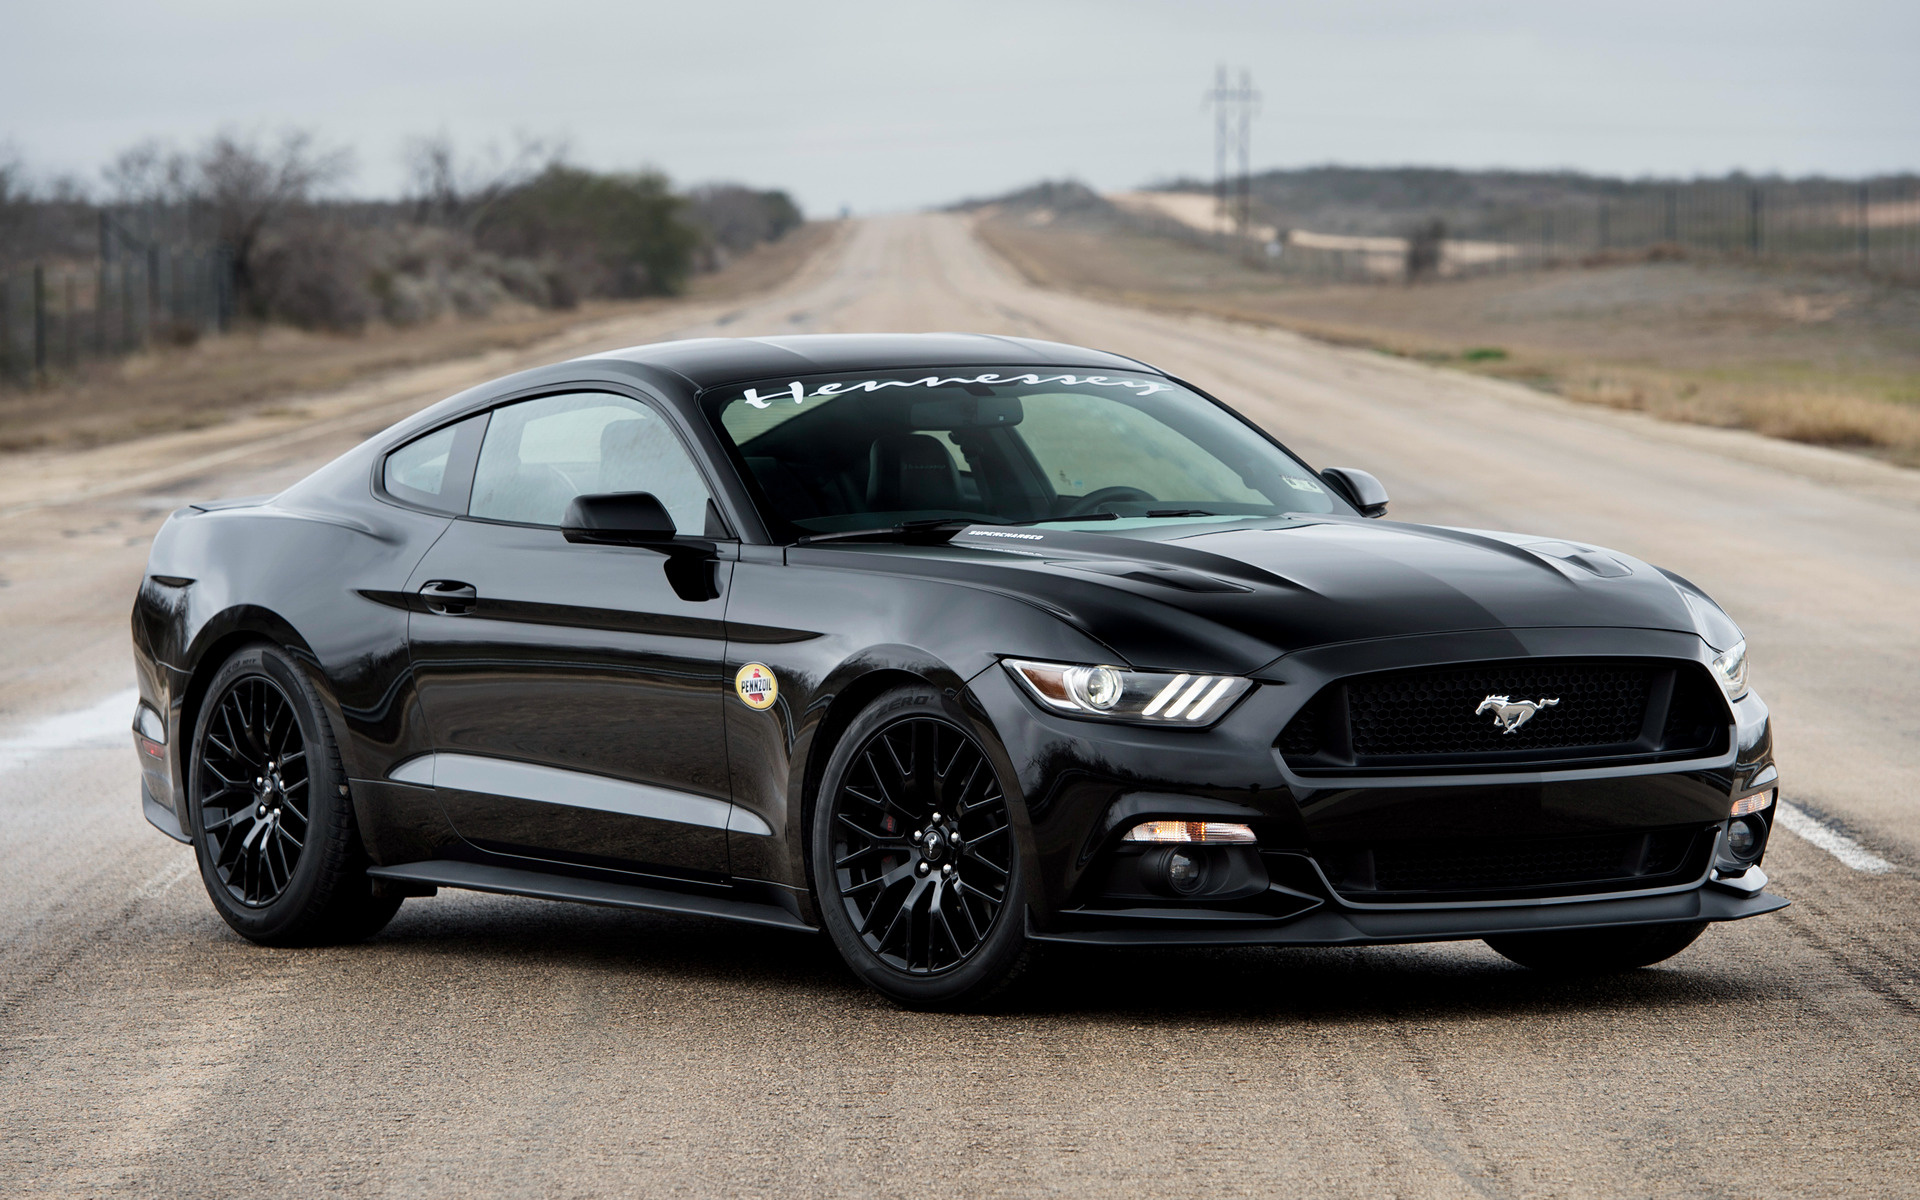 2015 Hennessey Mustang GT HPE700 Supercharged - Wallpapers and HD